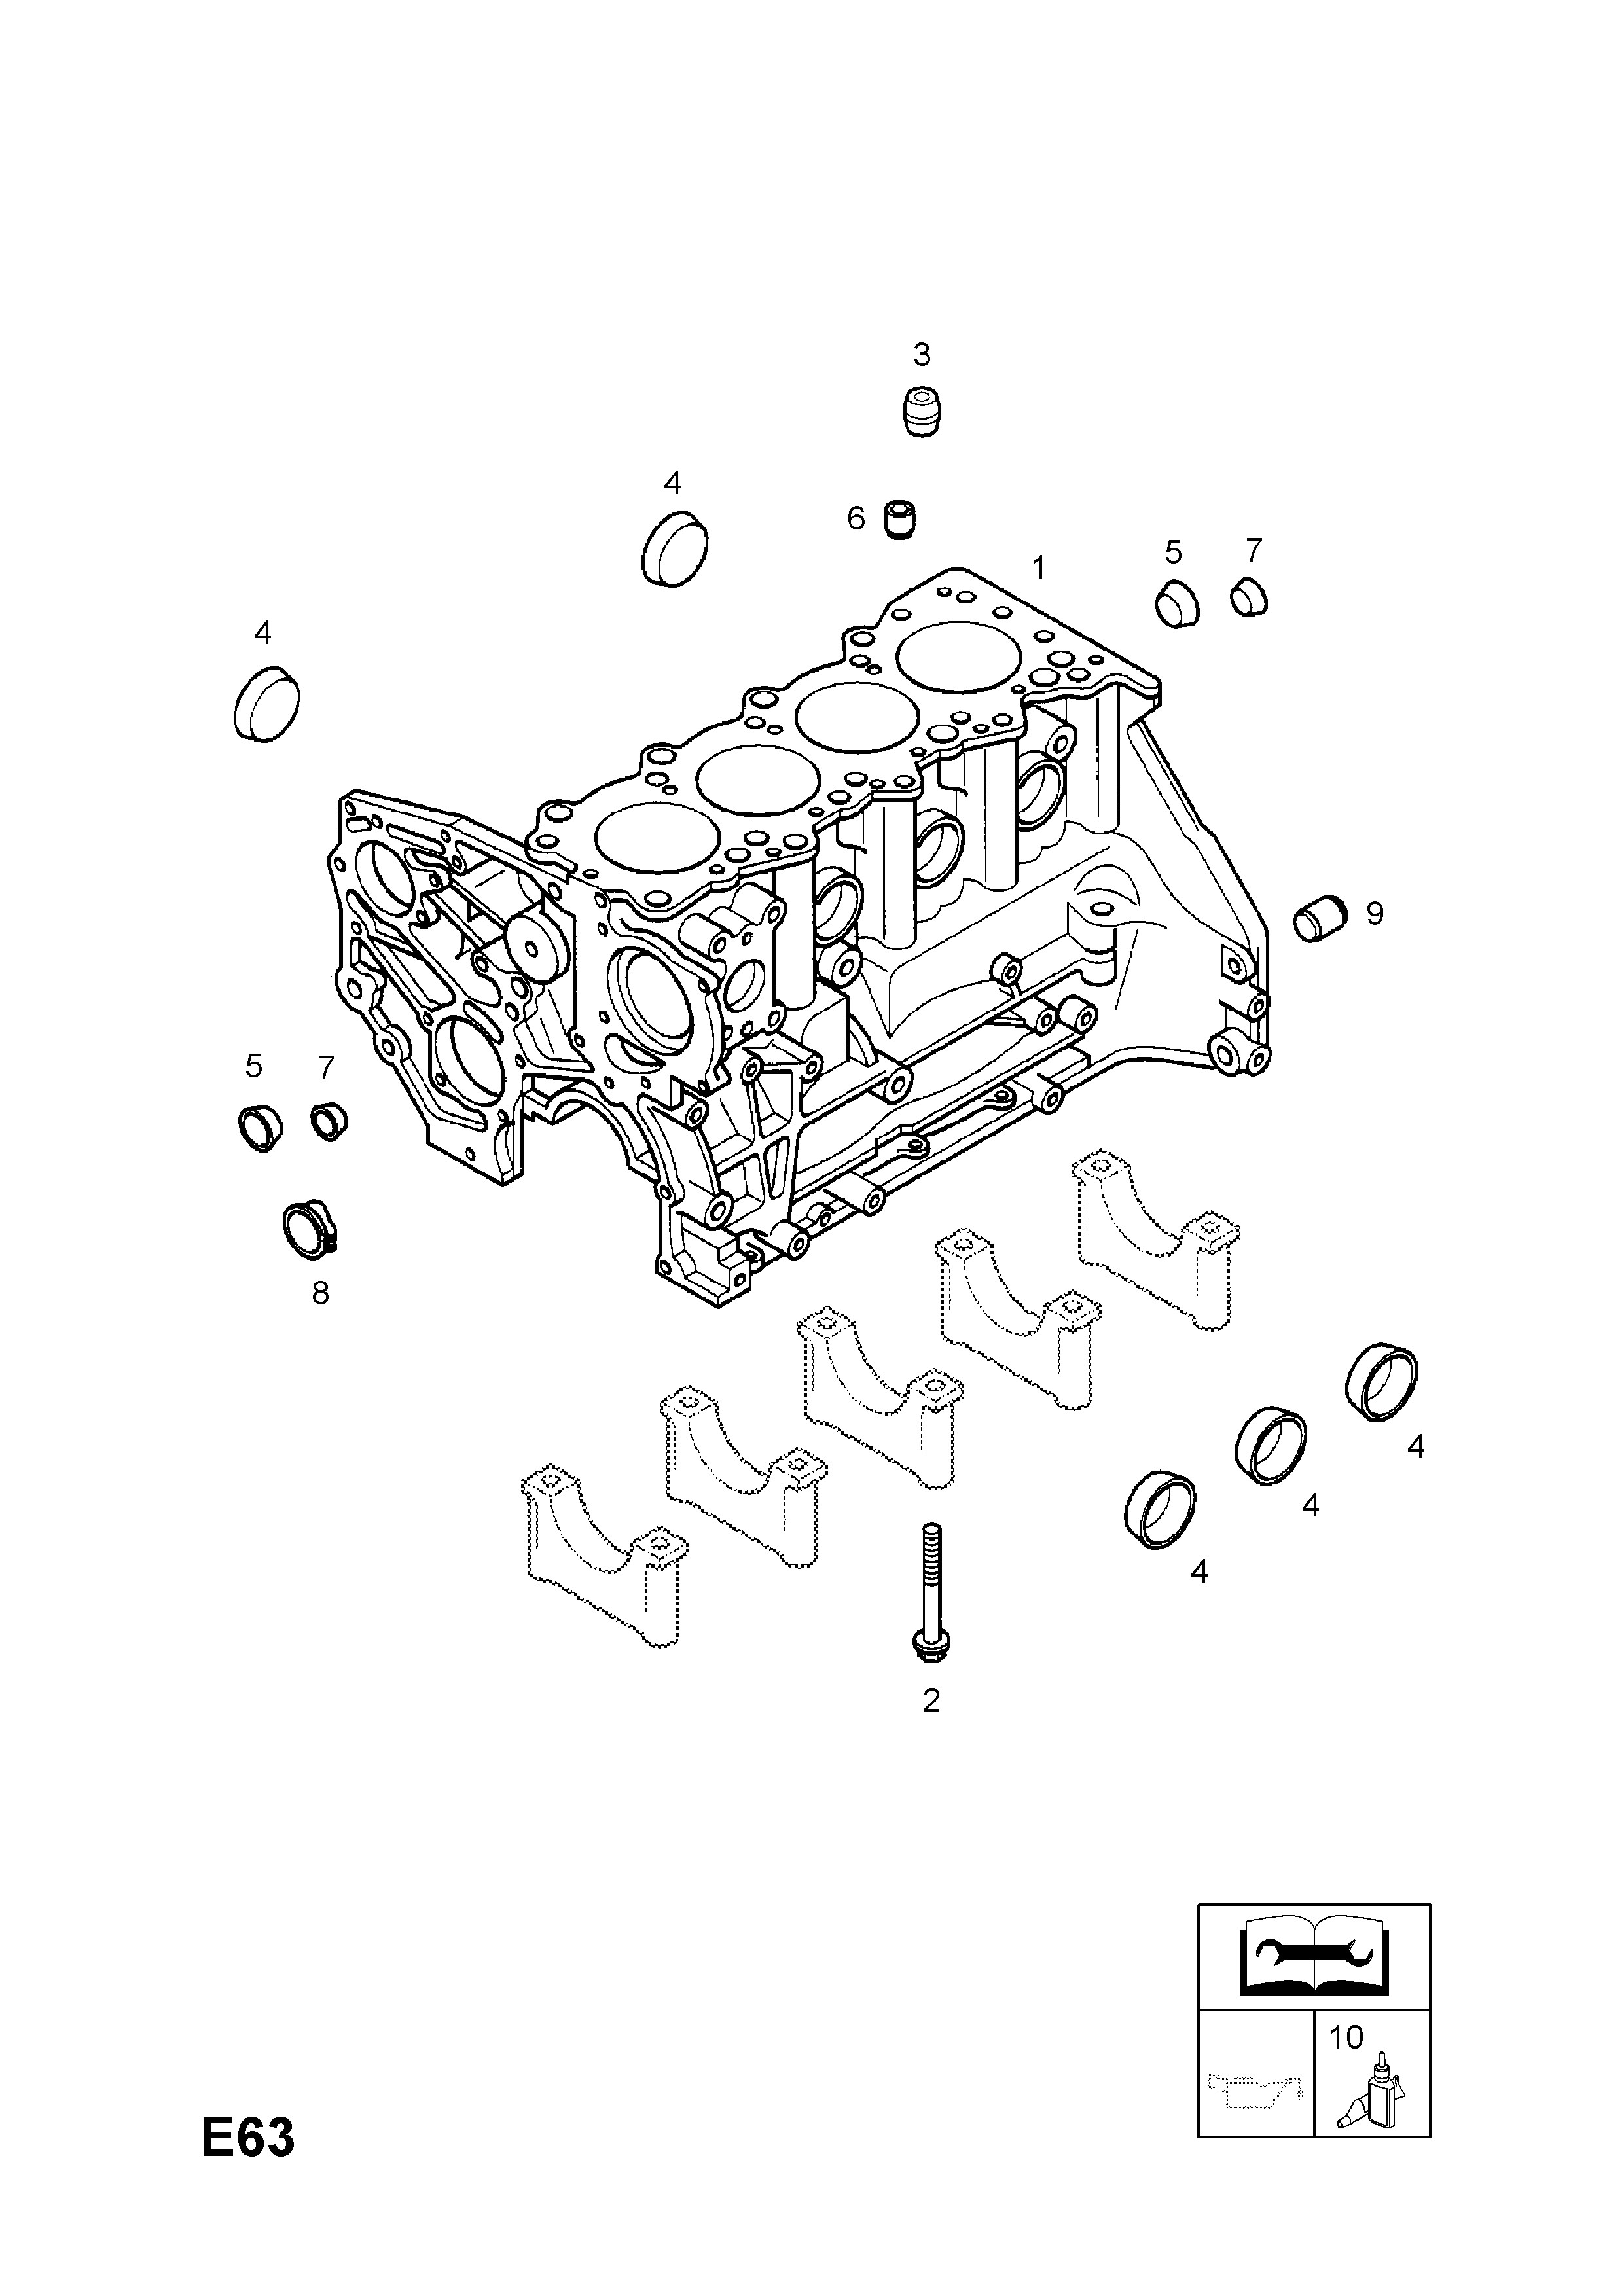 Vauxhall astra Engine Parts Diagram Vauxhall astra H 2004 E Engine and Clutch 11 Z17dtl[lrb Of Vauxhall astra Engine Parts Diagram